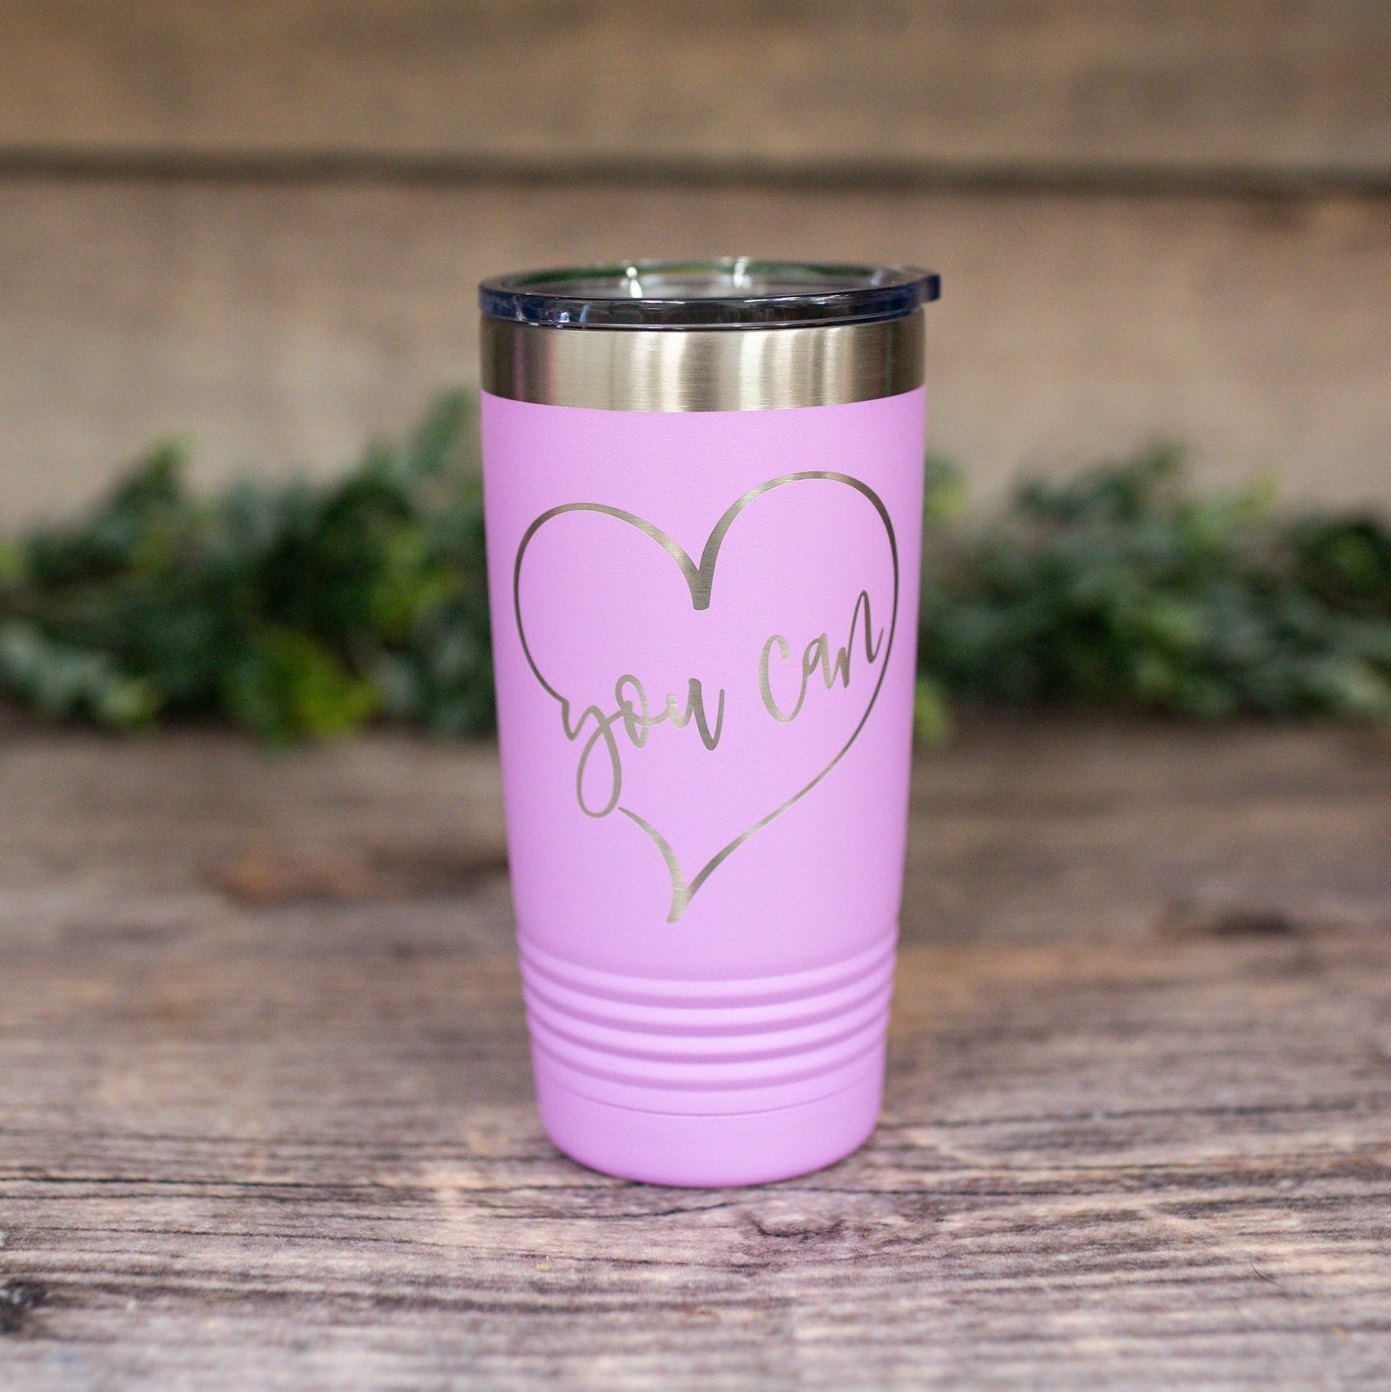 https://3cetching.com/wp-content/uploads/2021/07/you-can-engraved-travel-tumbler-personalized-travel-mug-motivational-gift-mug-for-her-60f776e8.jpg